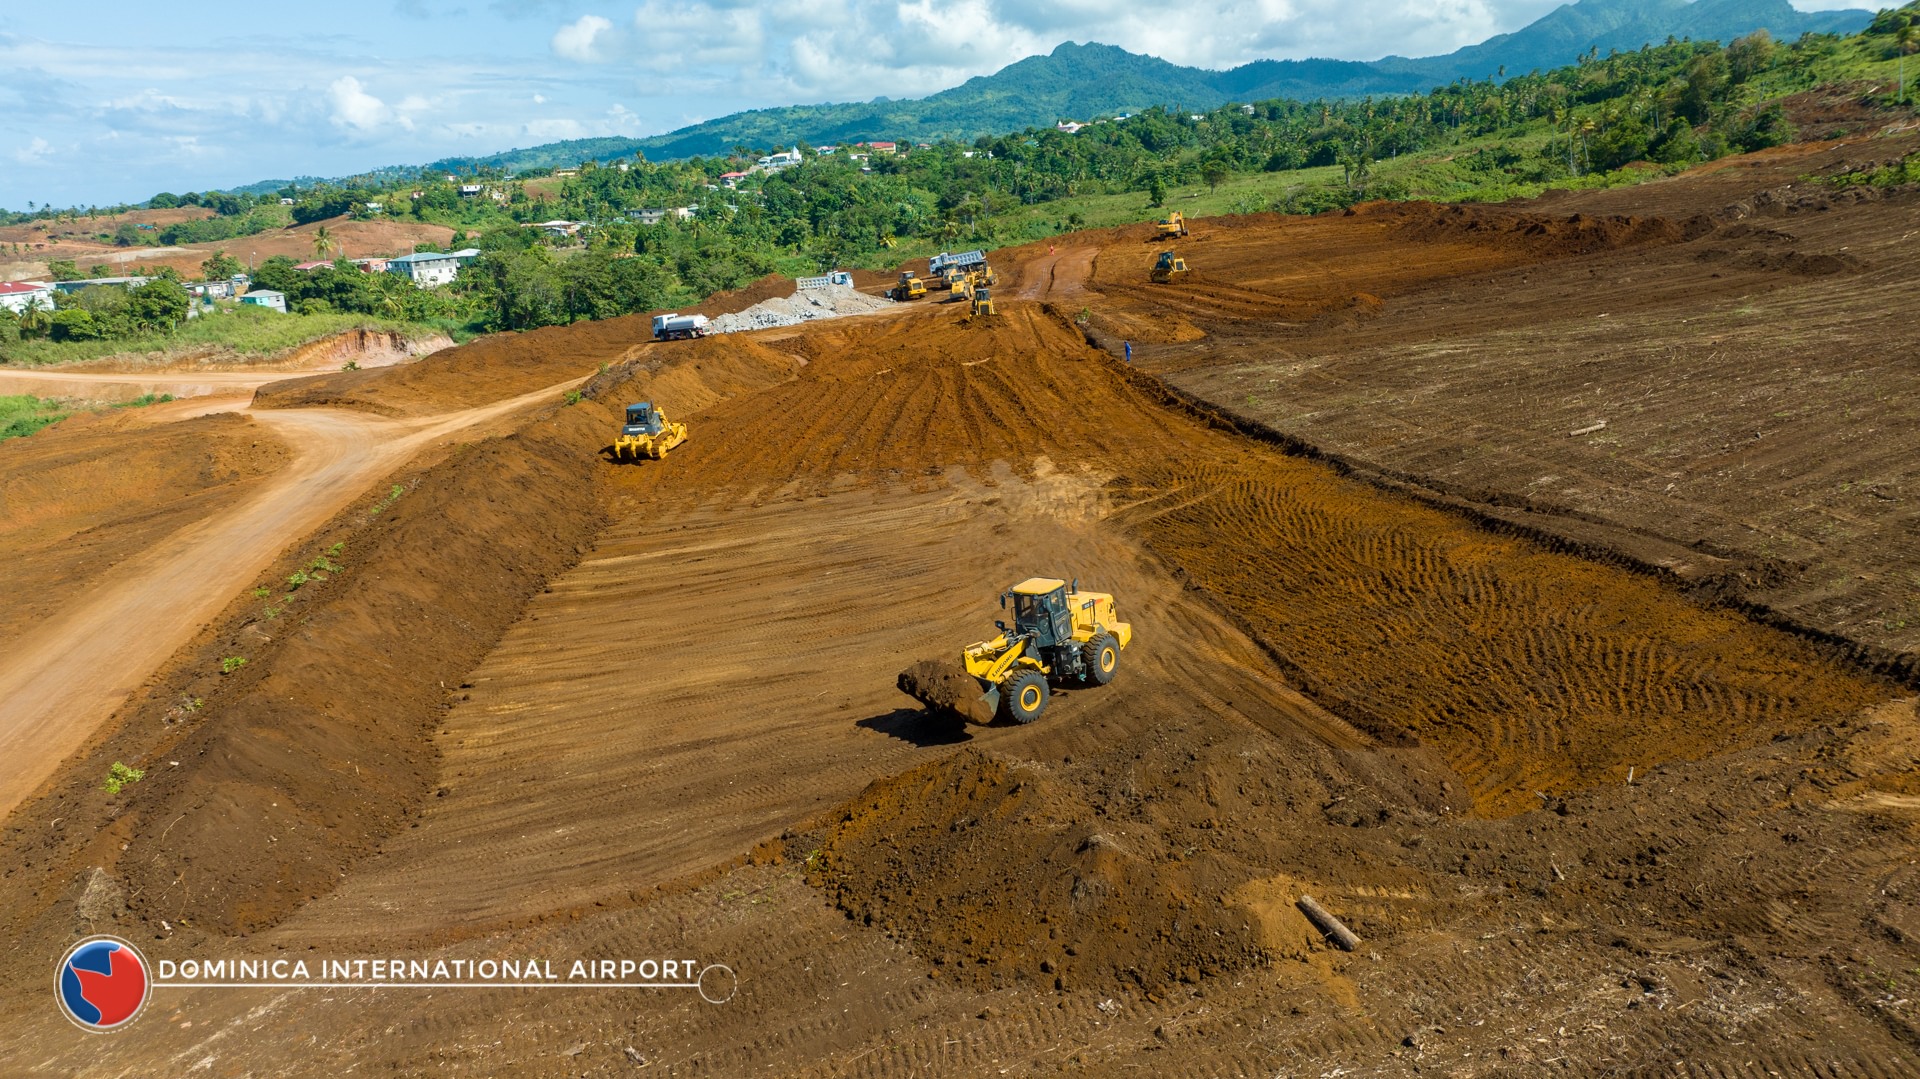 Construction of Dominica International Airport continues in full swing